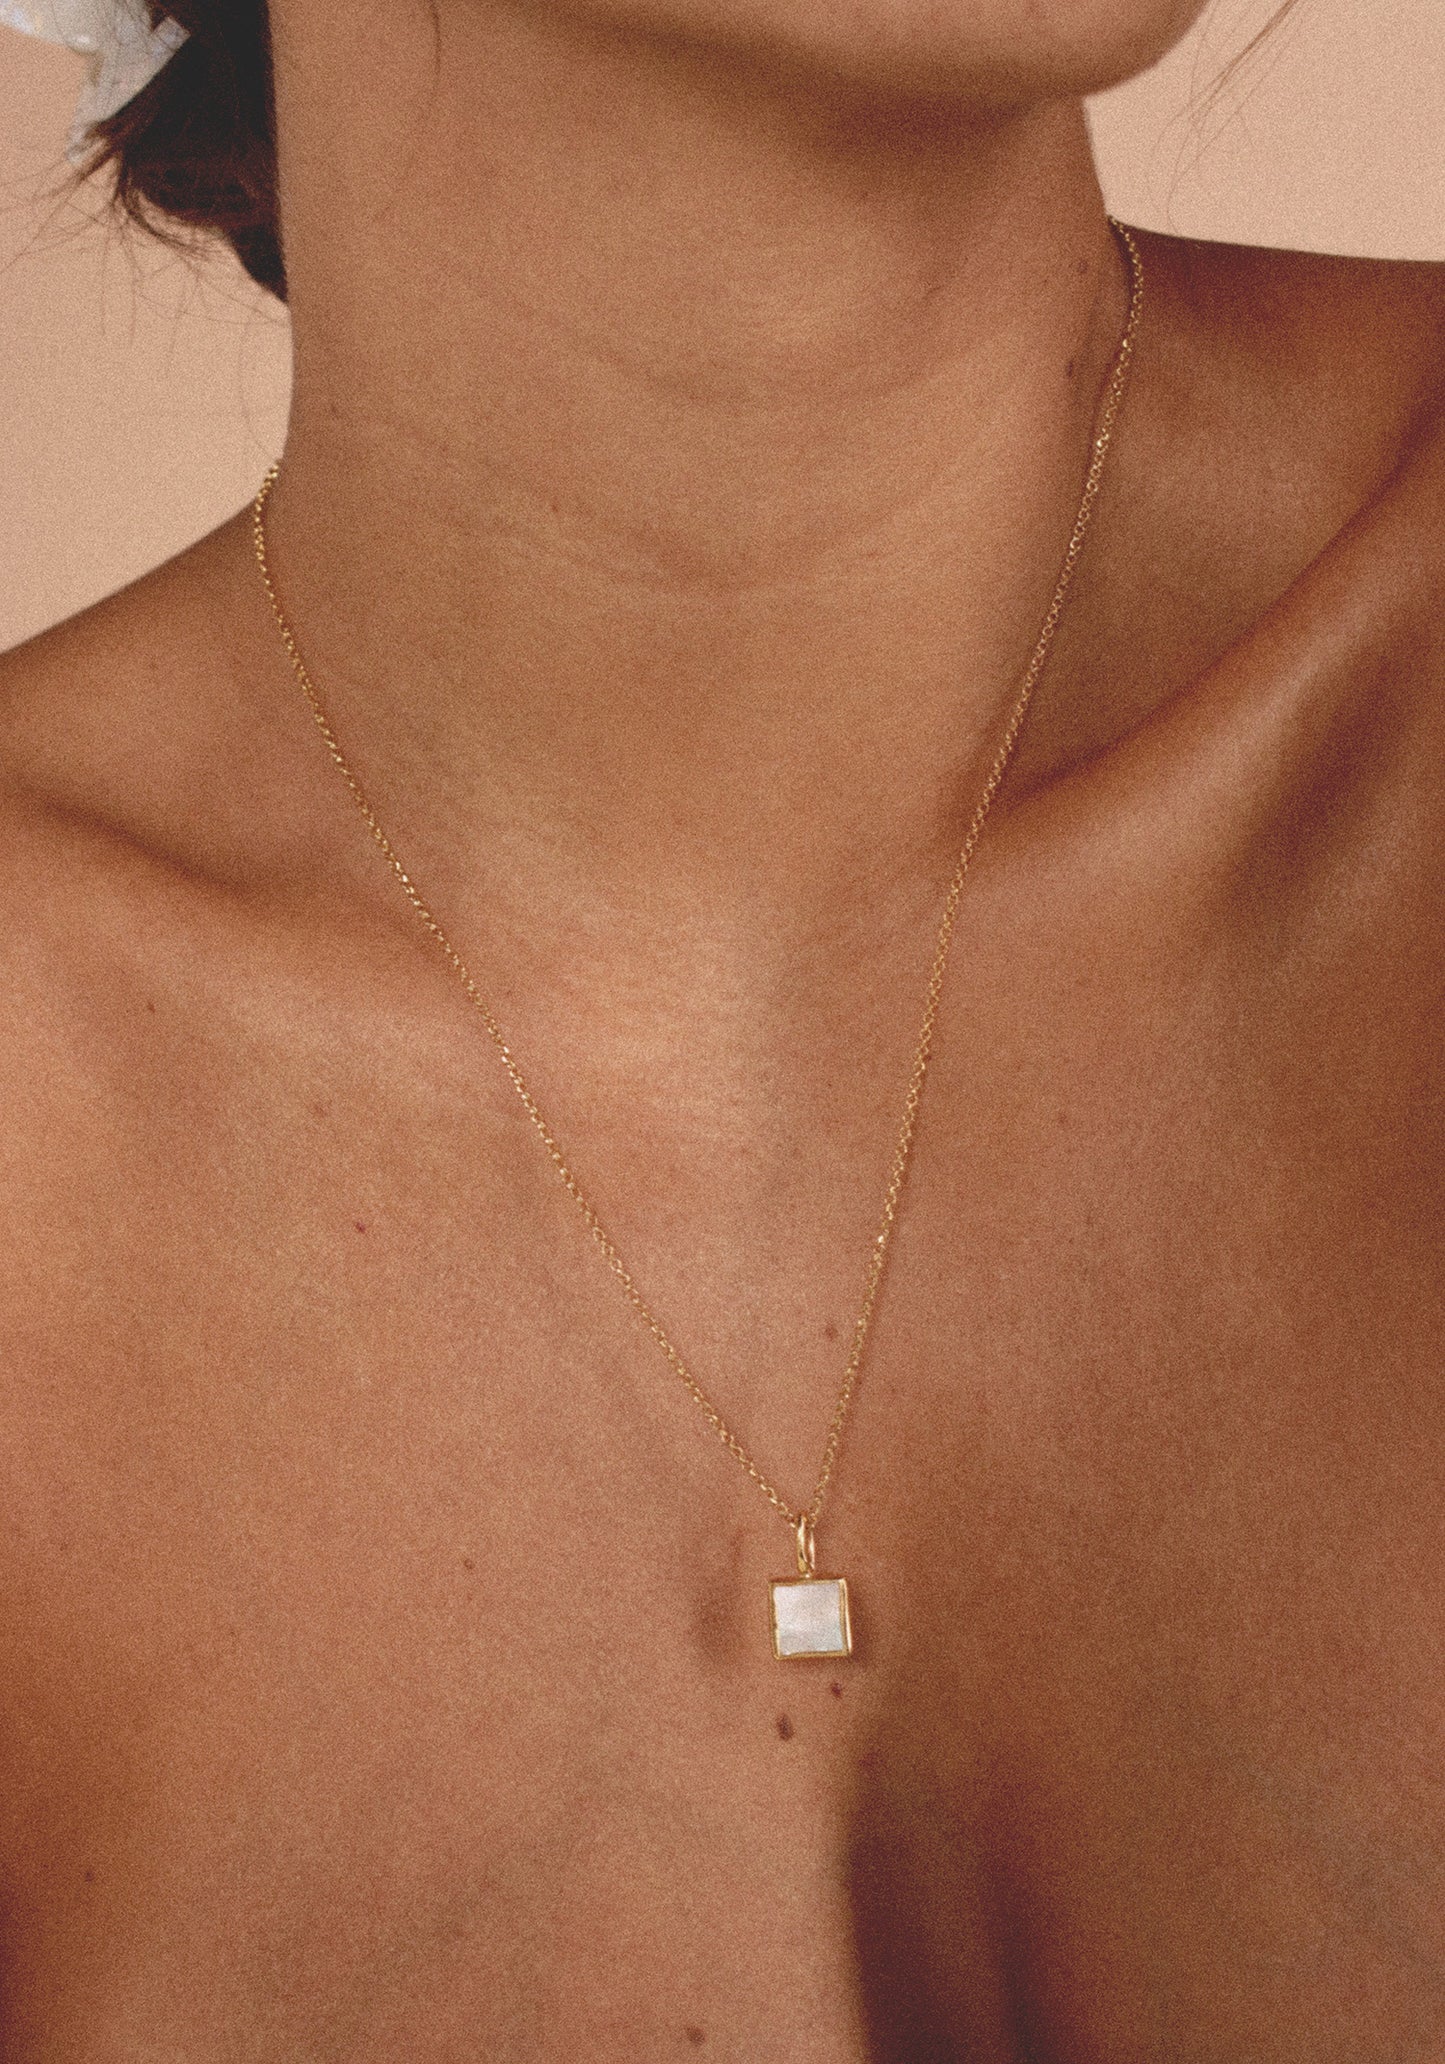 Gold Mother Of Pearl Necklace